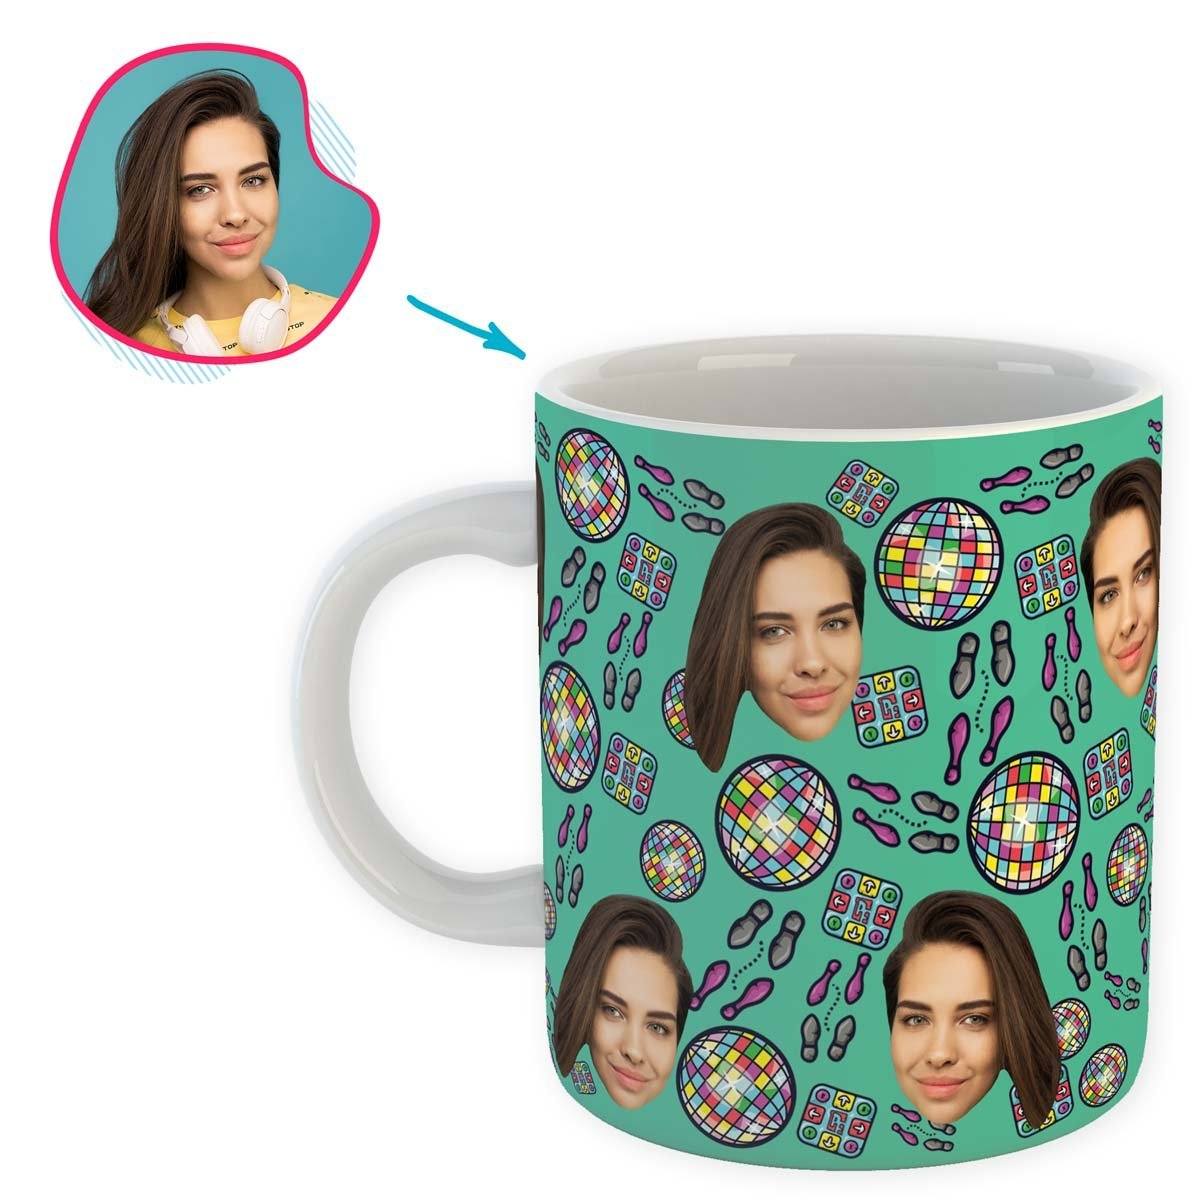 mint Dancing mug personalized with photo of face printed on it